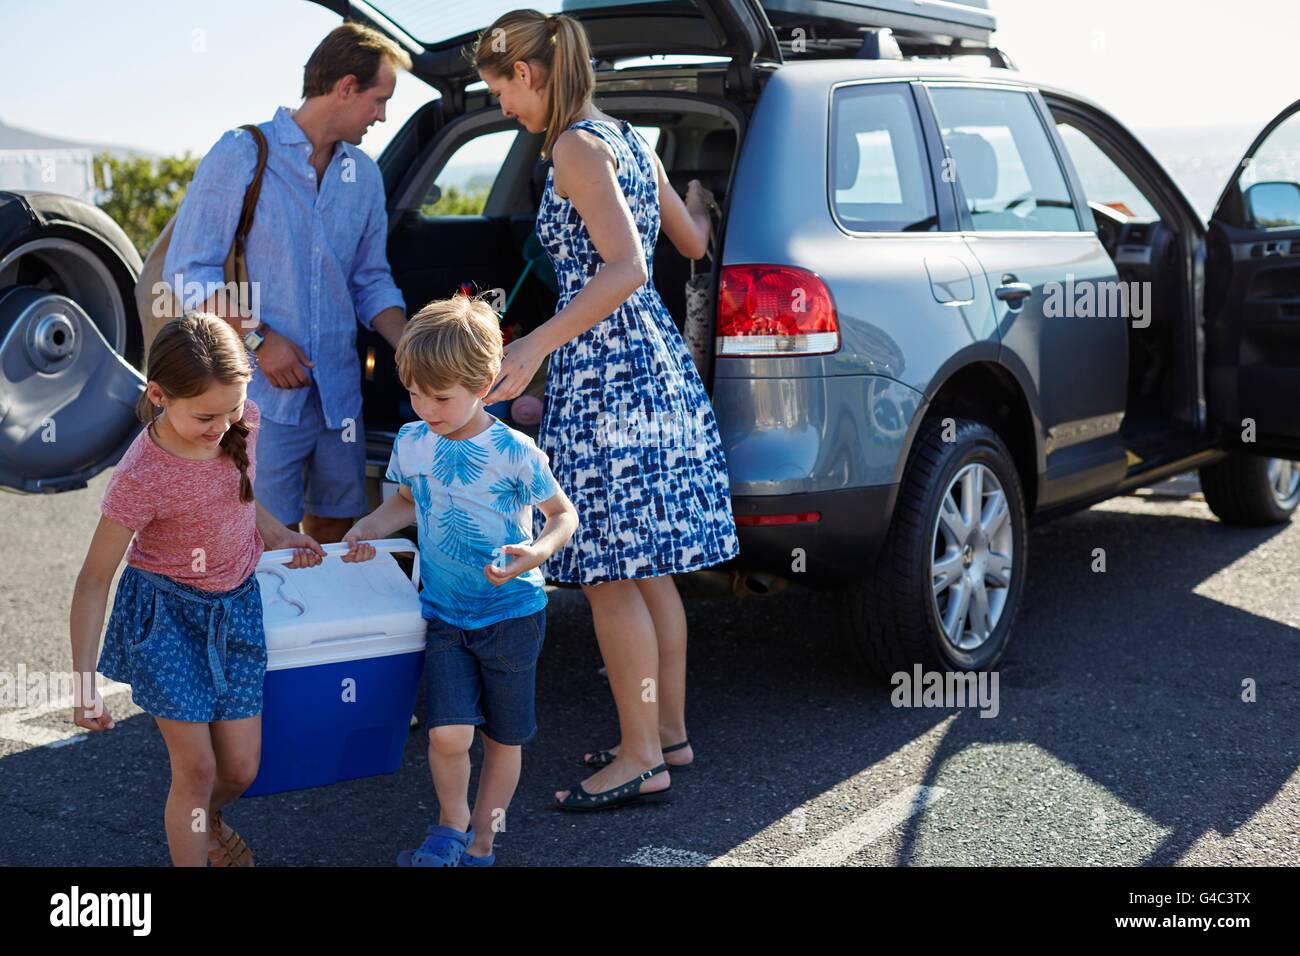 MODEL RELEASED. Family with two children unpacking the car. Stock Photo